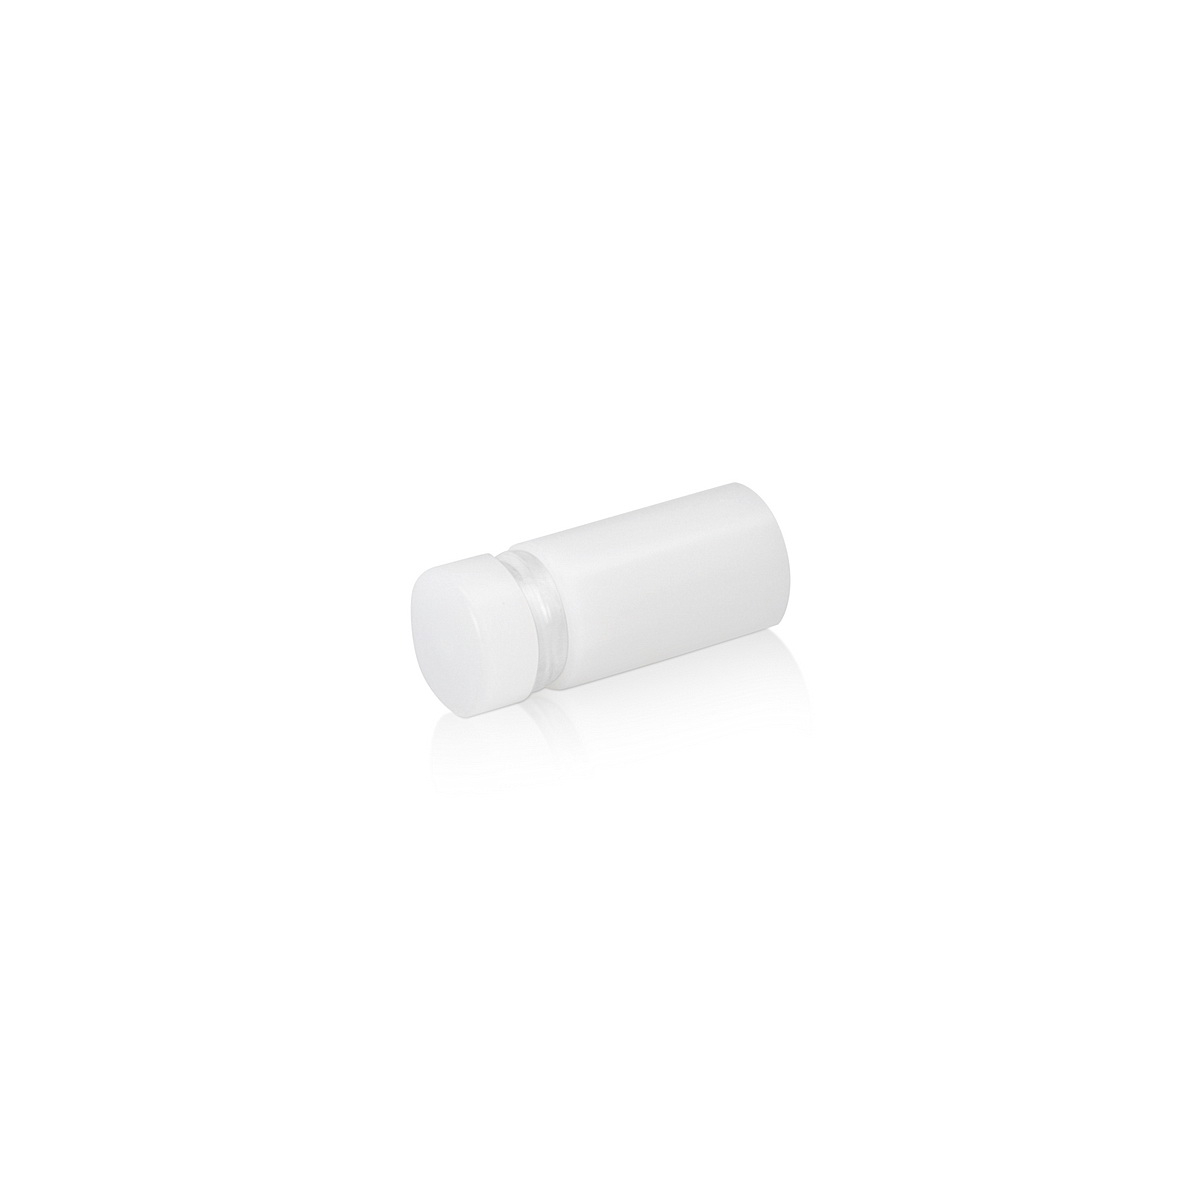 1/2'' Diameter X 1/2'' Barrel Length, White Acrylic Standoffs. Easy Fasten Standoff (For Inside Use Only) Tamper Proof [Required Material Hole Size: 3/8'']